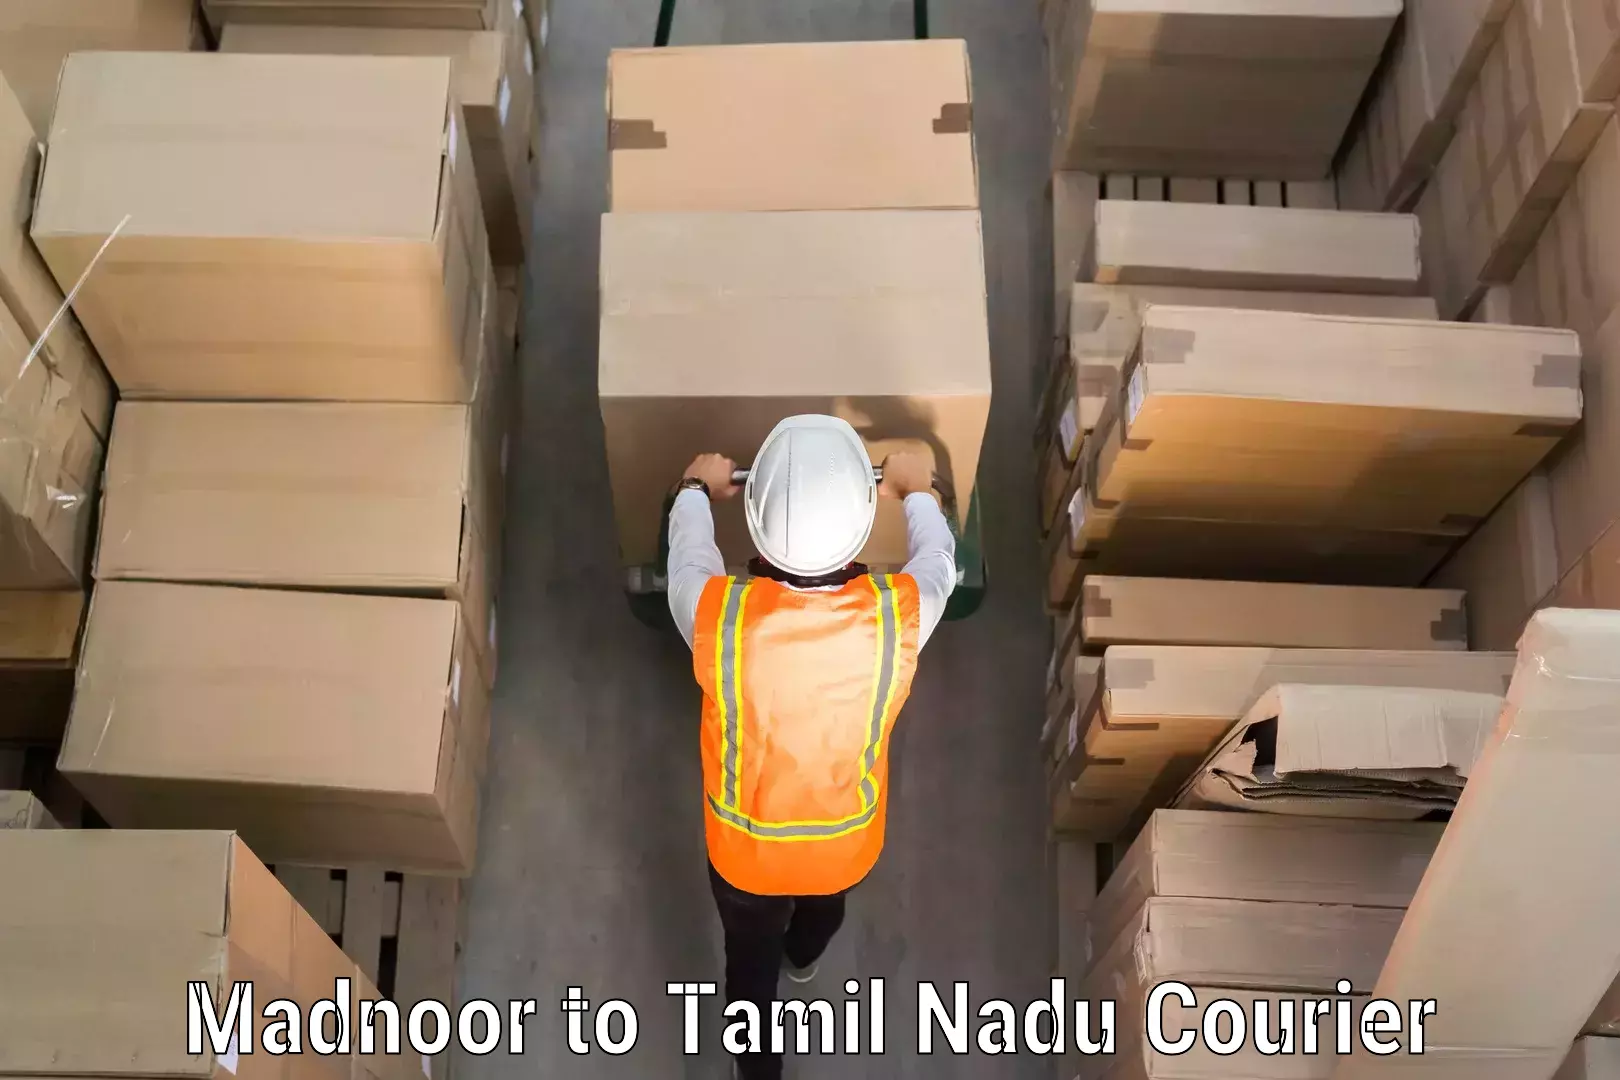 Weekend baggage shipping Madnoor to Ennore Port Chennai